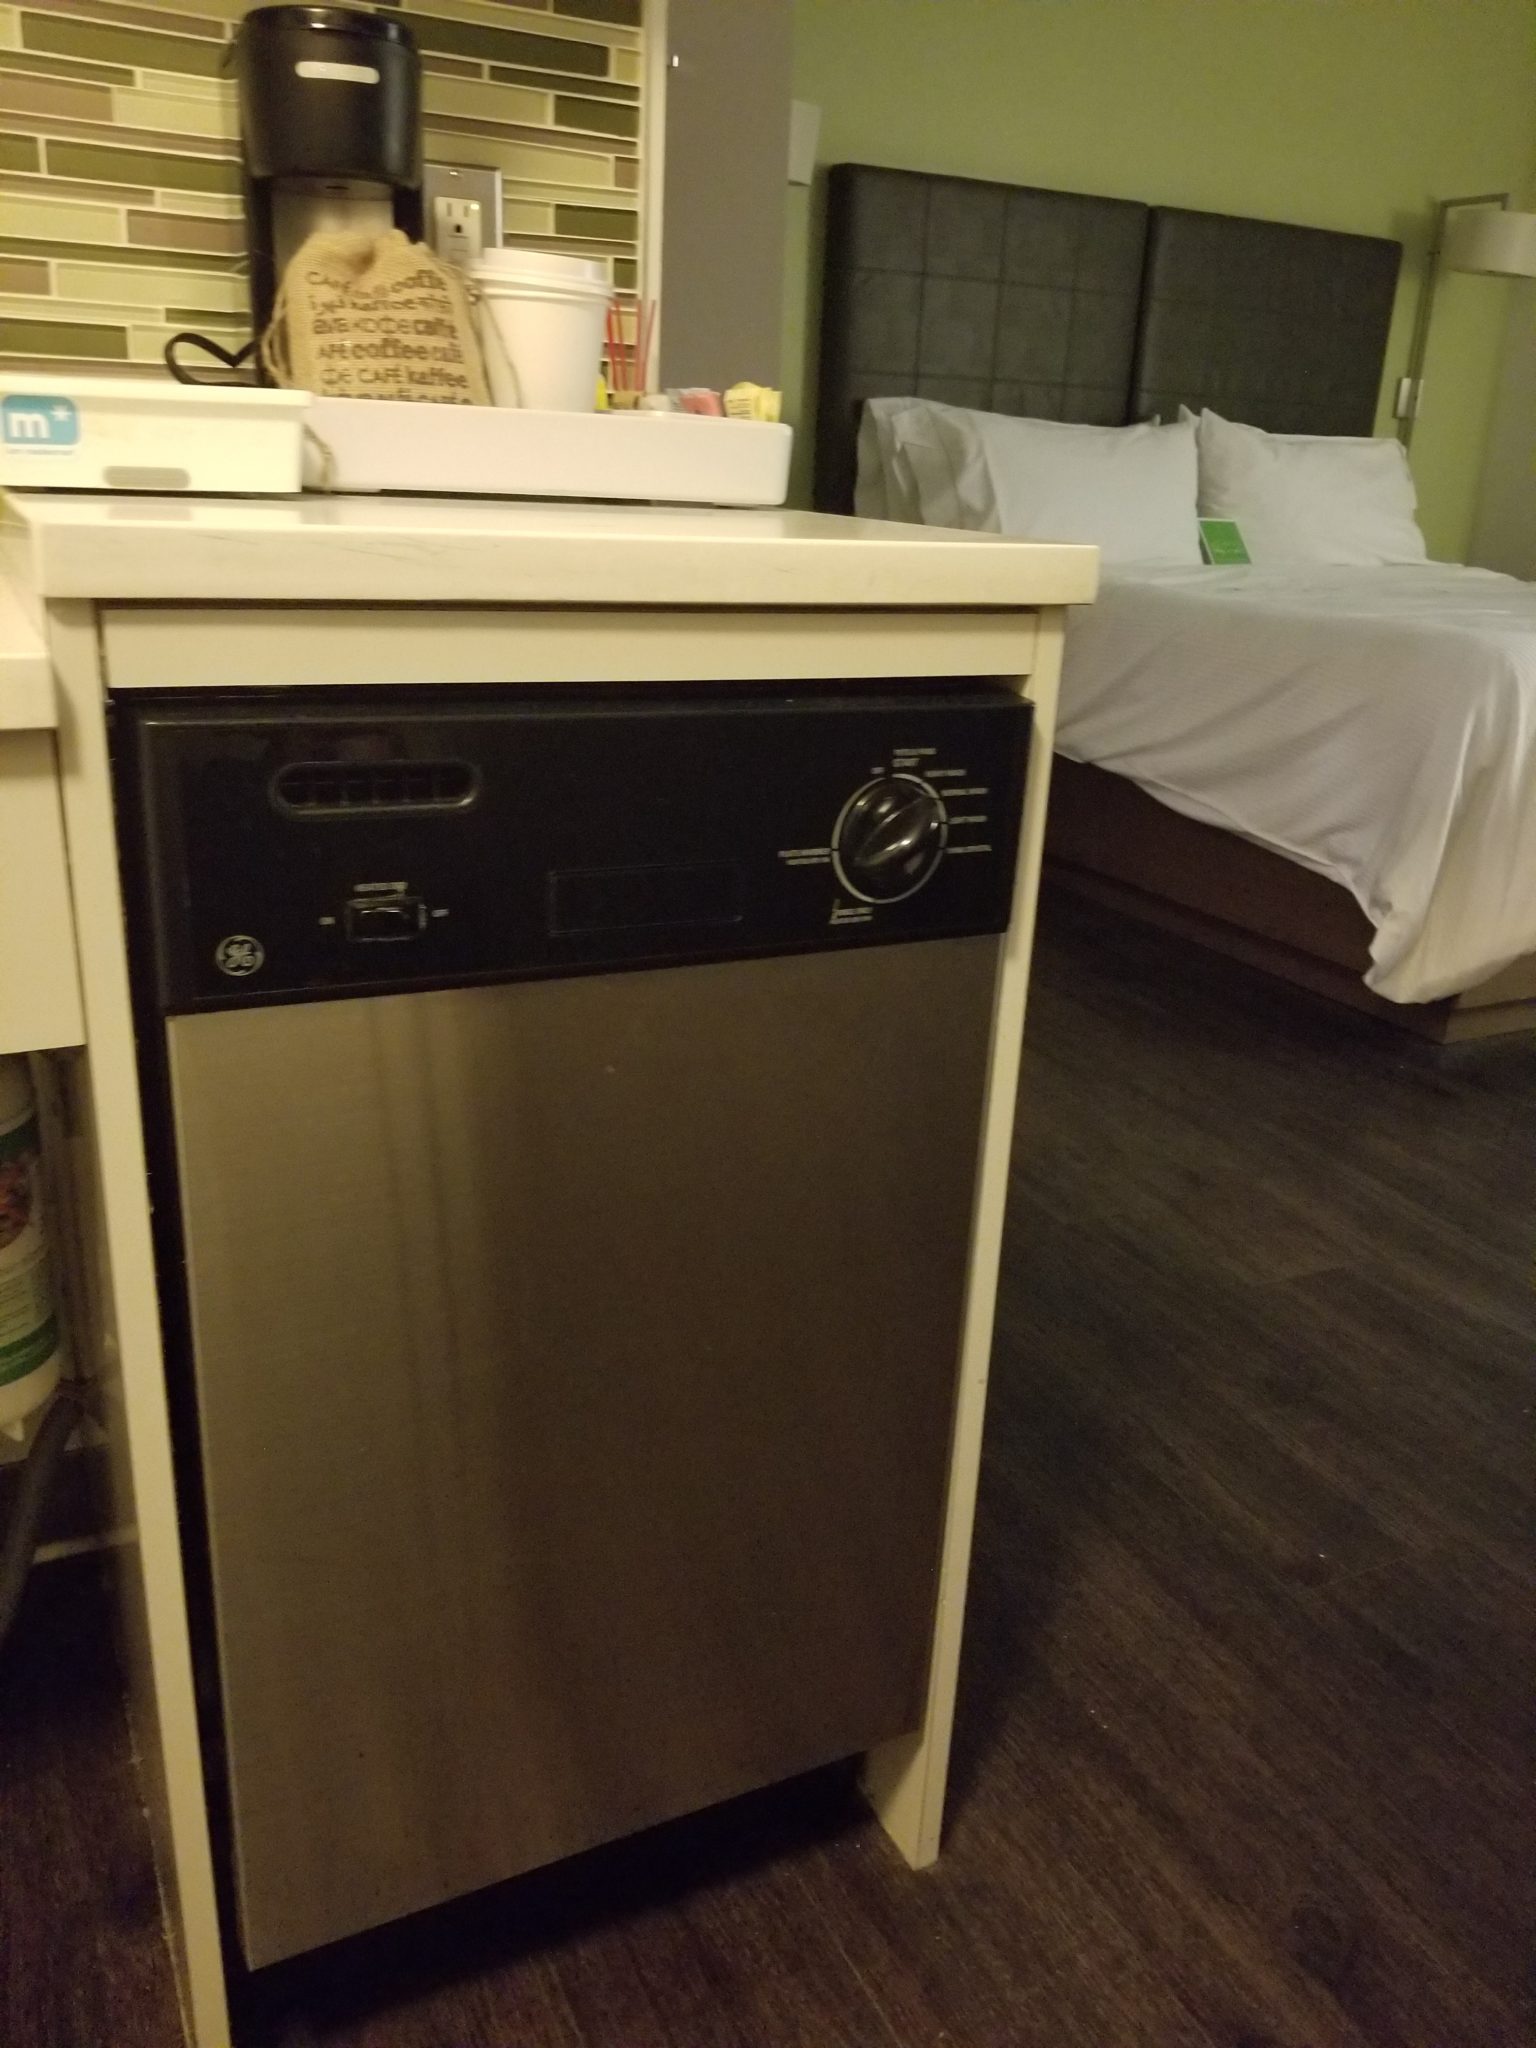 a dishwasher in a room